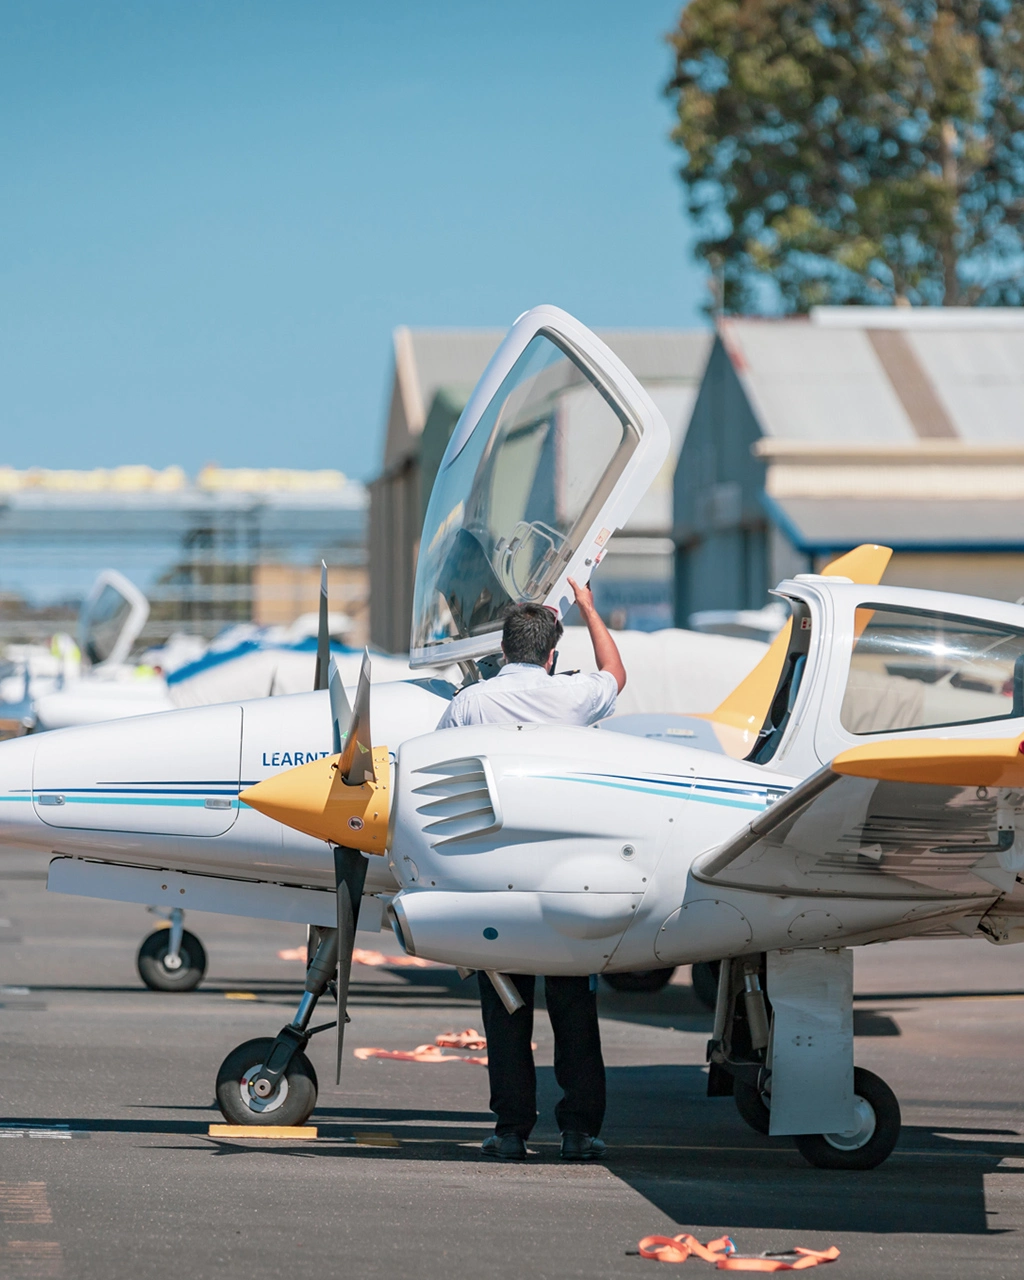 Learn To Fly Becomes The First Diamond DA42 Flight School In Victoria